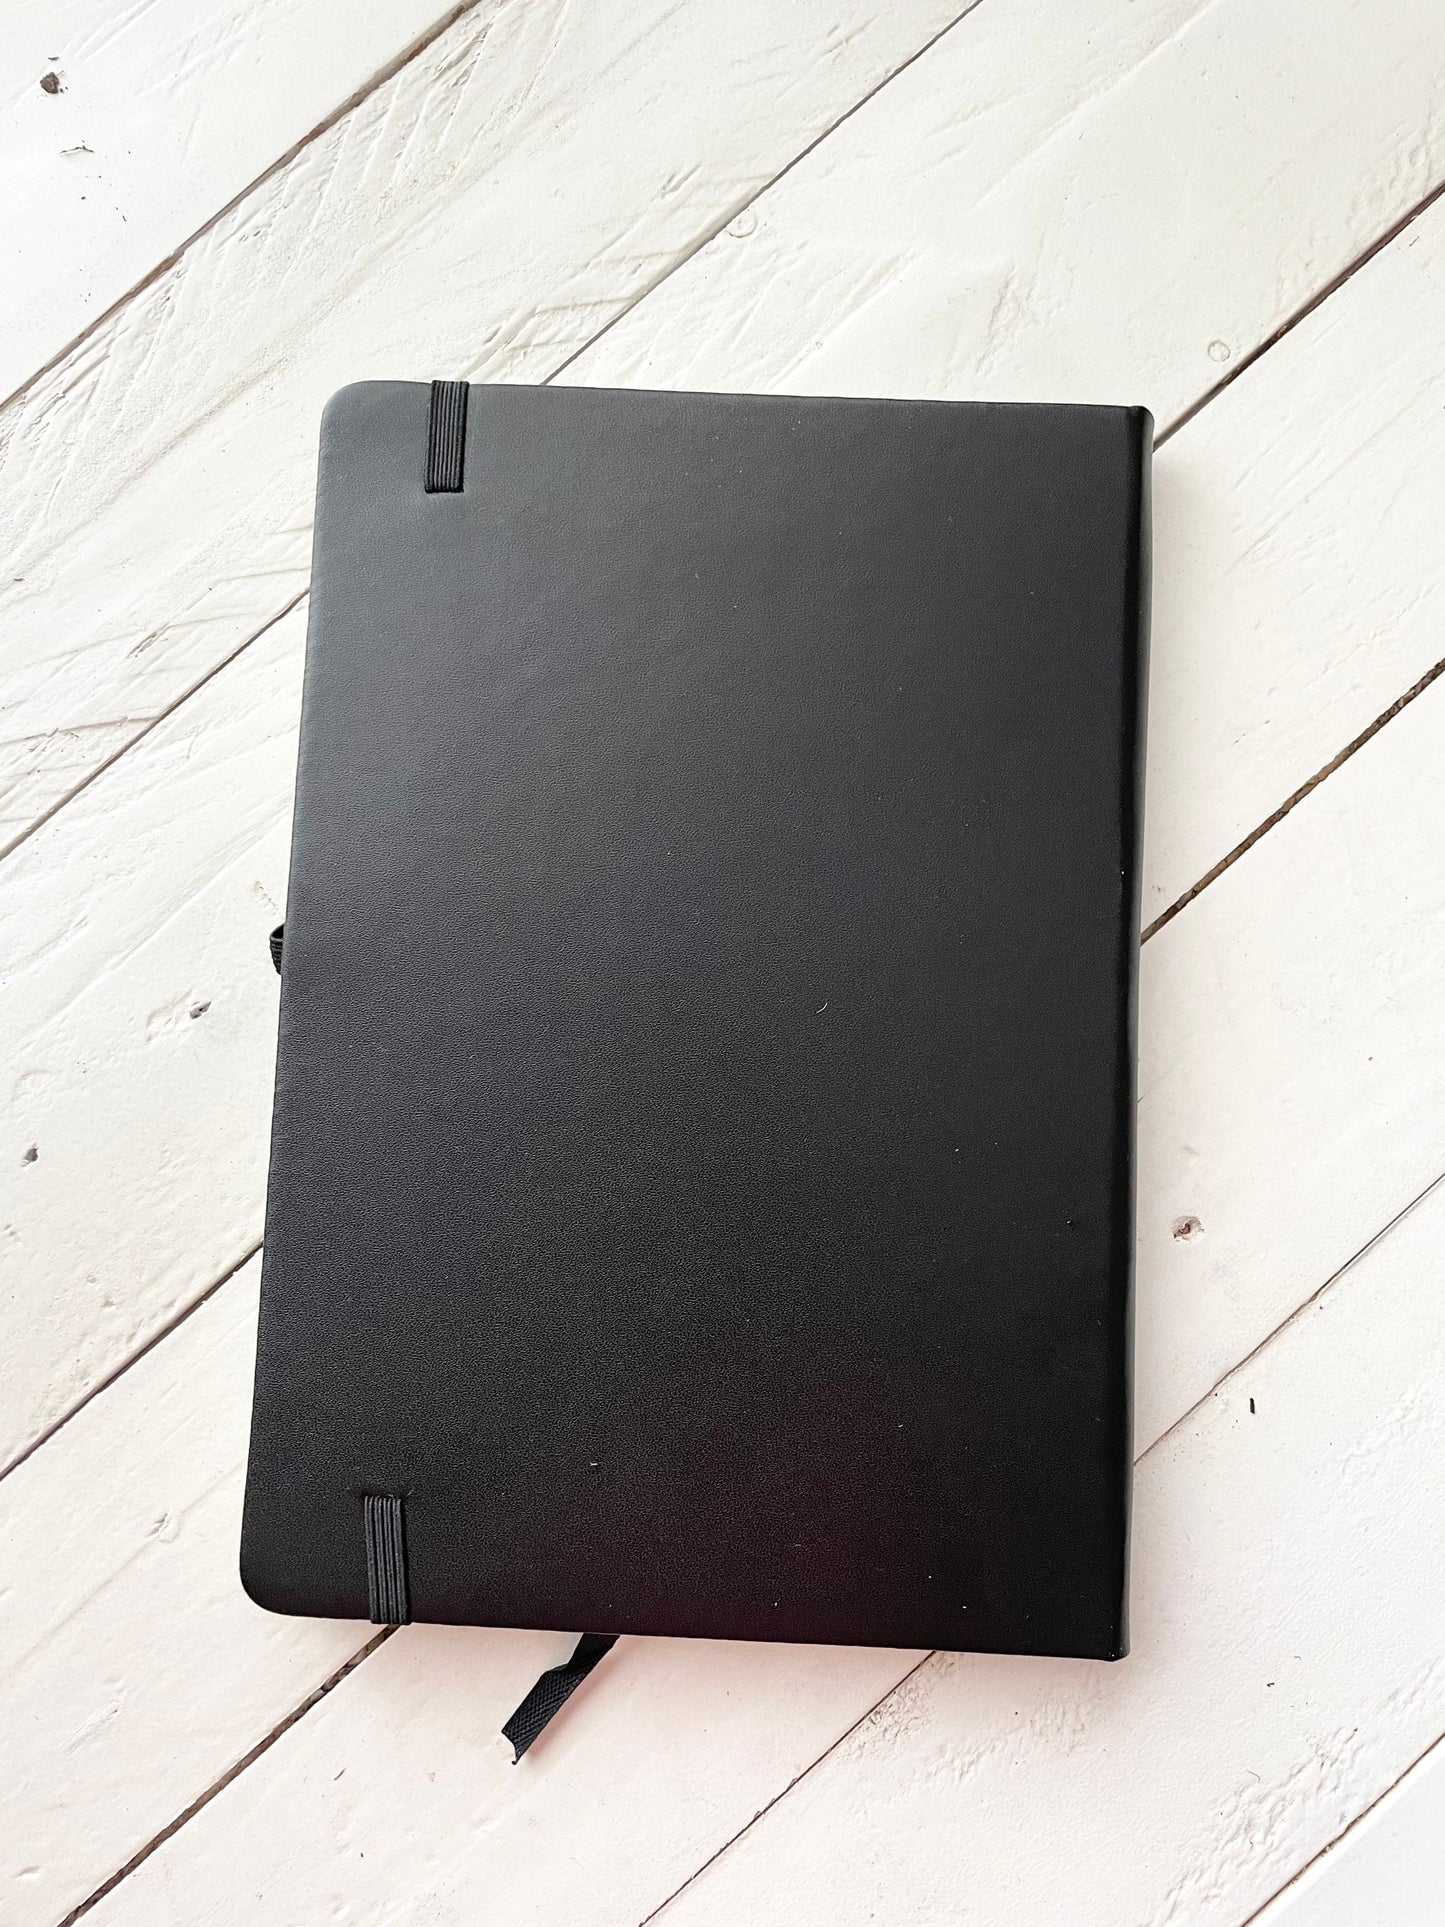 The things I want to say to my patients but can’t, Black Lined Journal